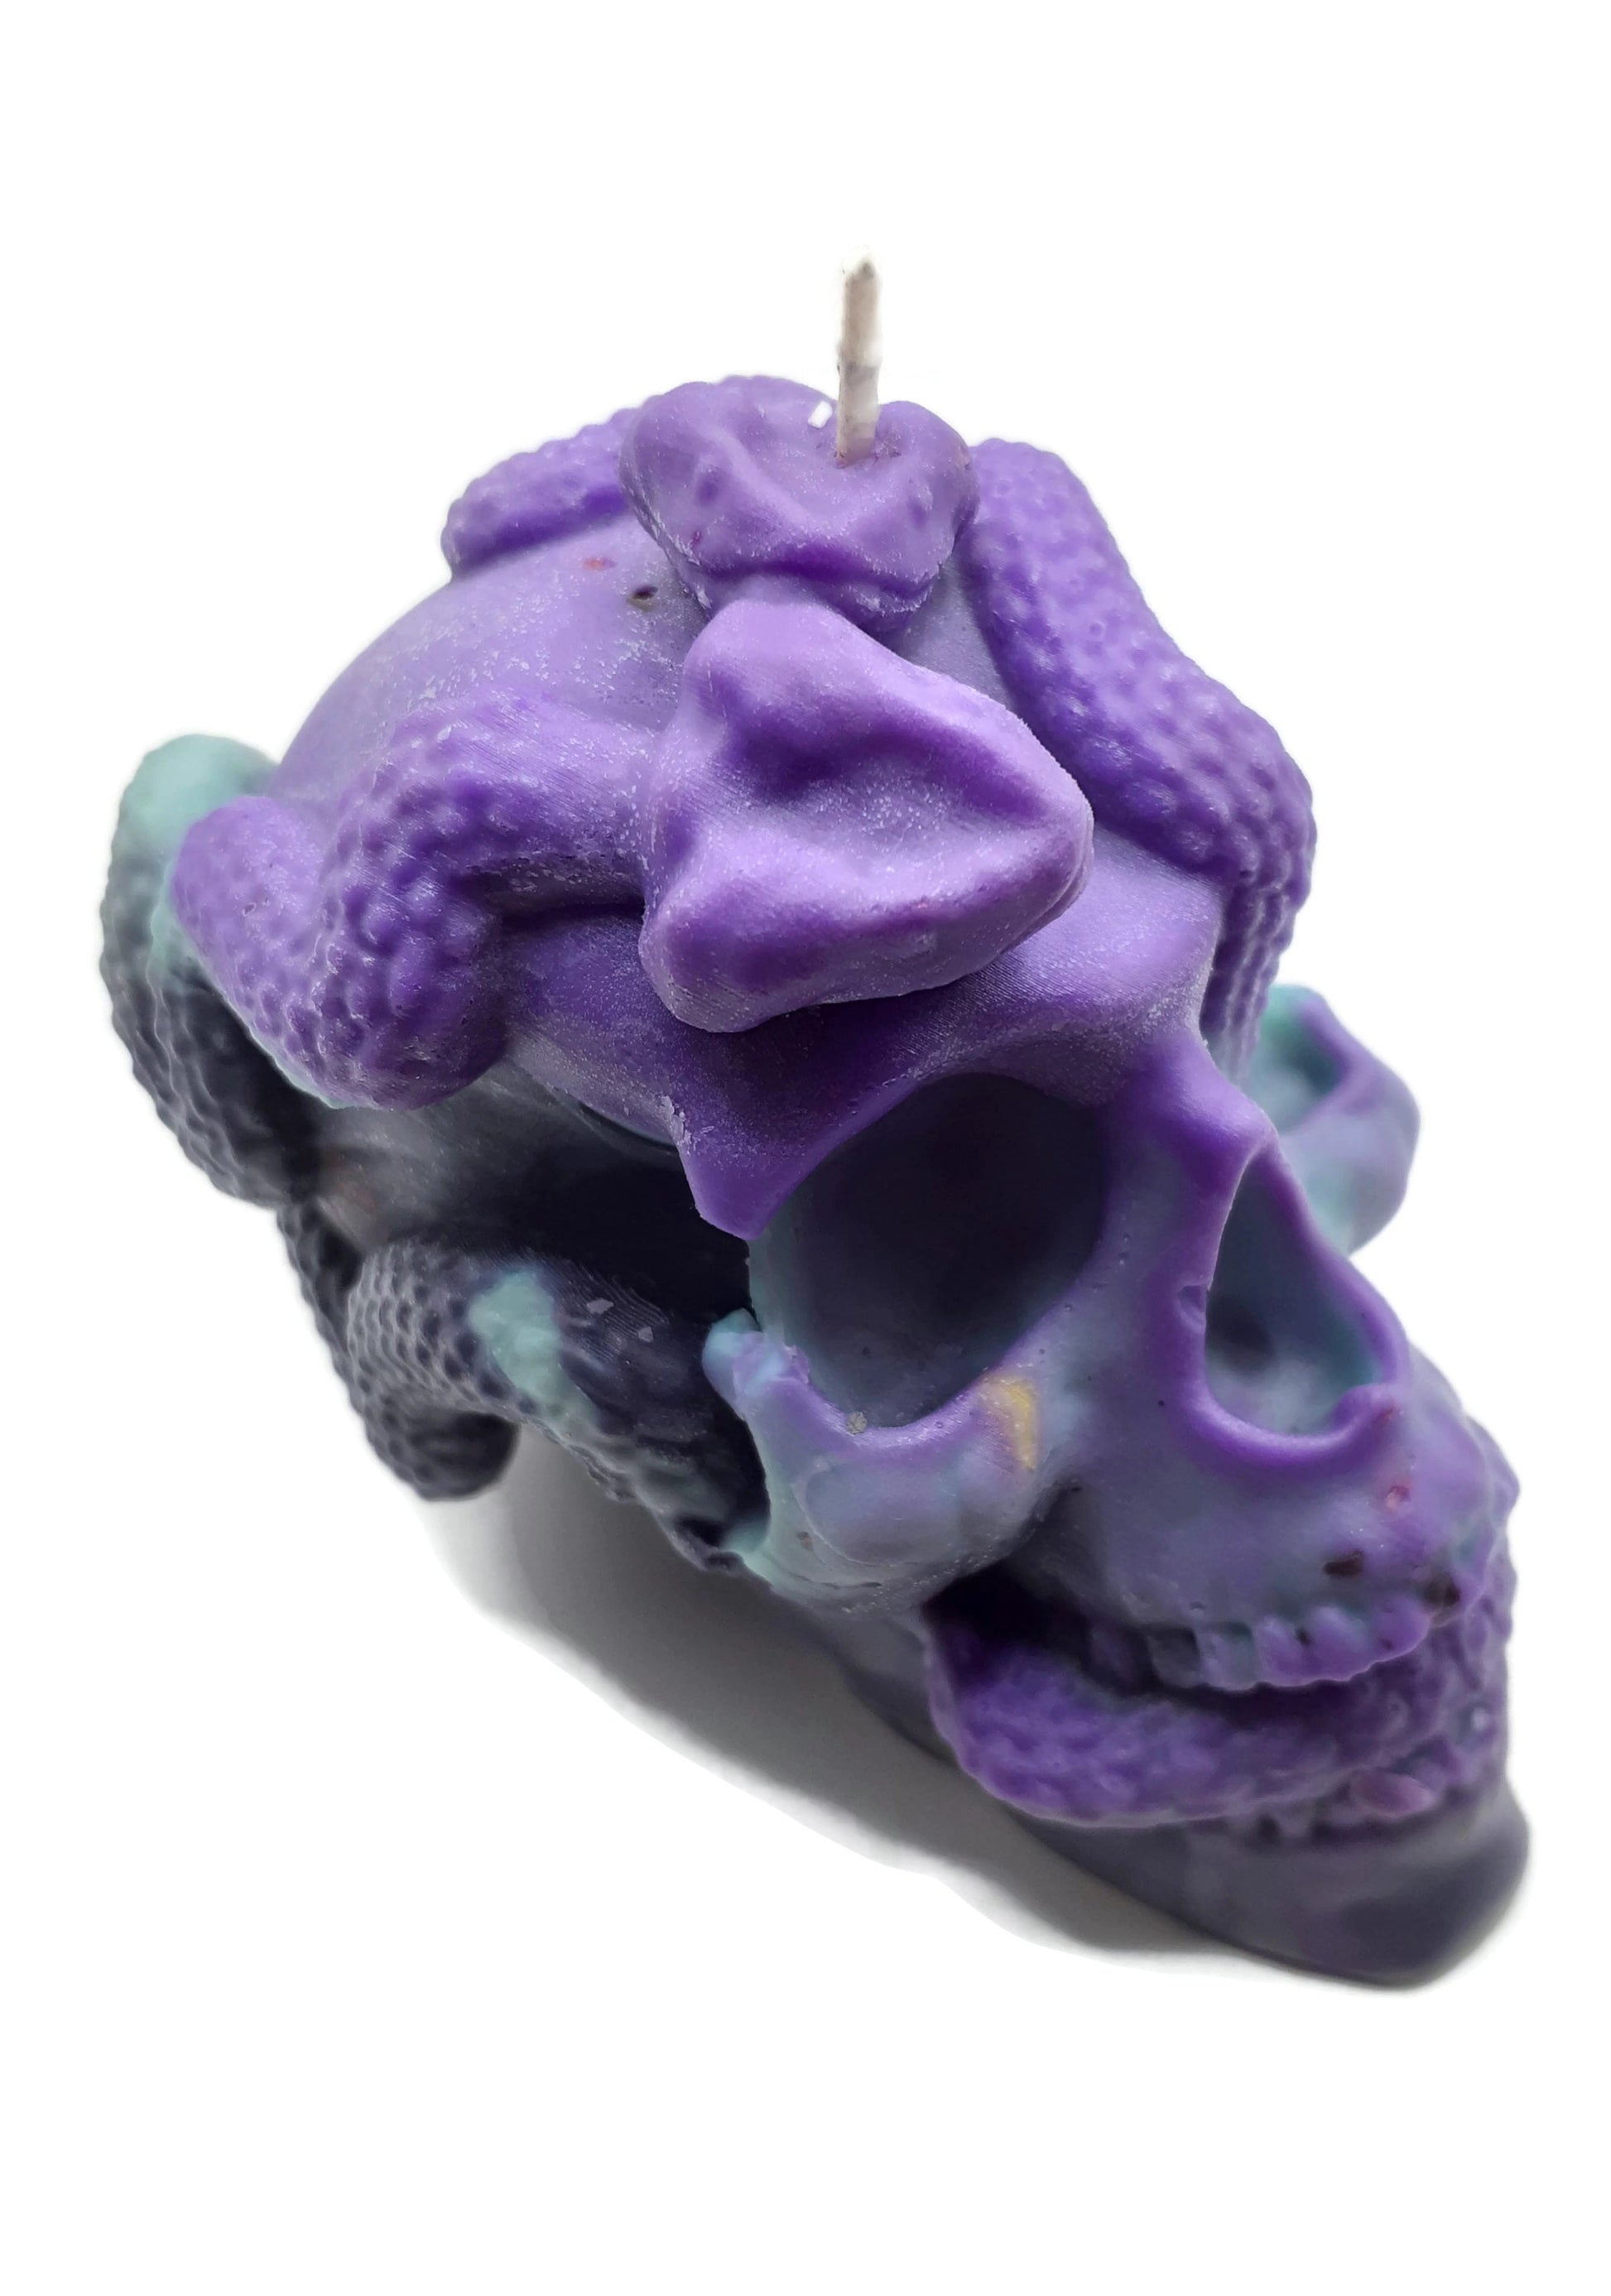 Purple, Teal, and Black Pastels One-of-a-Kind Human Skull & Snakes Candle 2.75"x4"- Candles of Skulls - Pagan Wicca Wiccan Altar Decorations